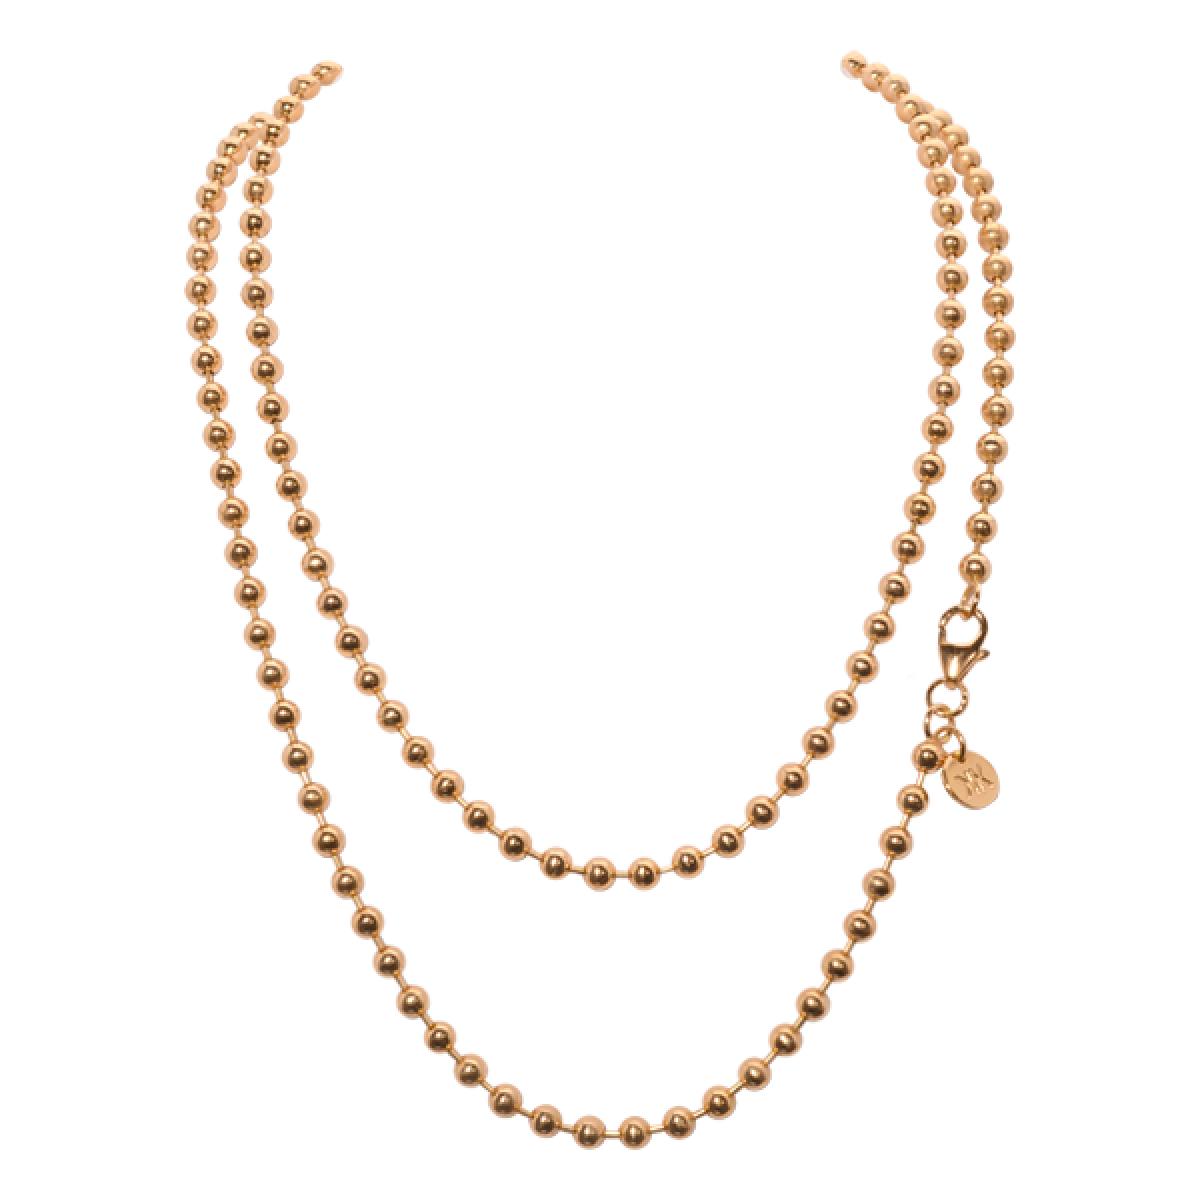 Jewellery Chain Png Hd - Chain, Transparent background PNG HD thumbnail